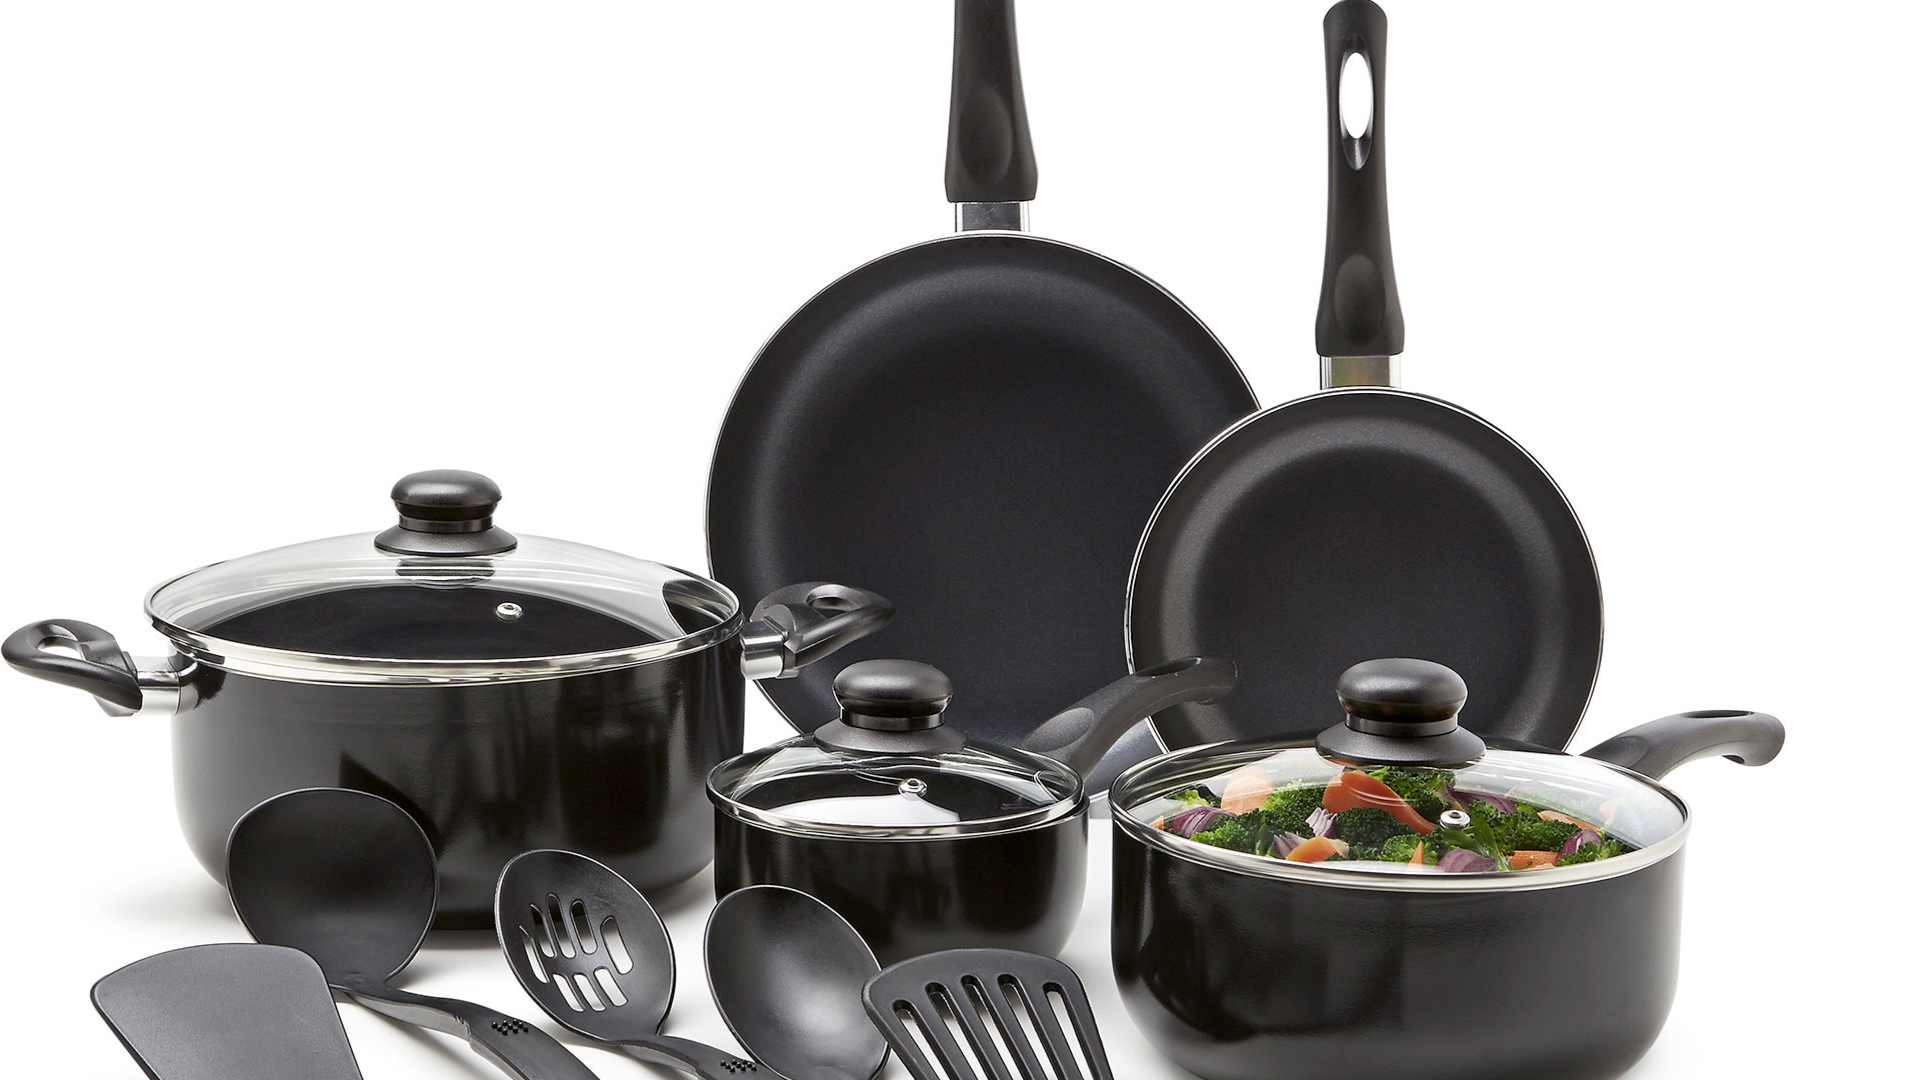 Cooks 13-piece nonstick cookware set for $19 after rebate